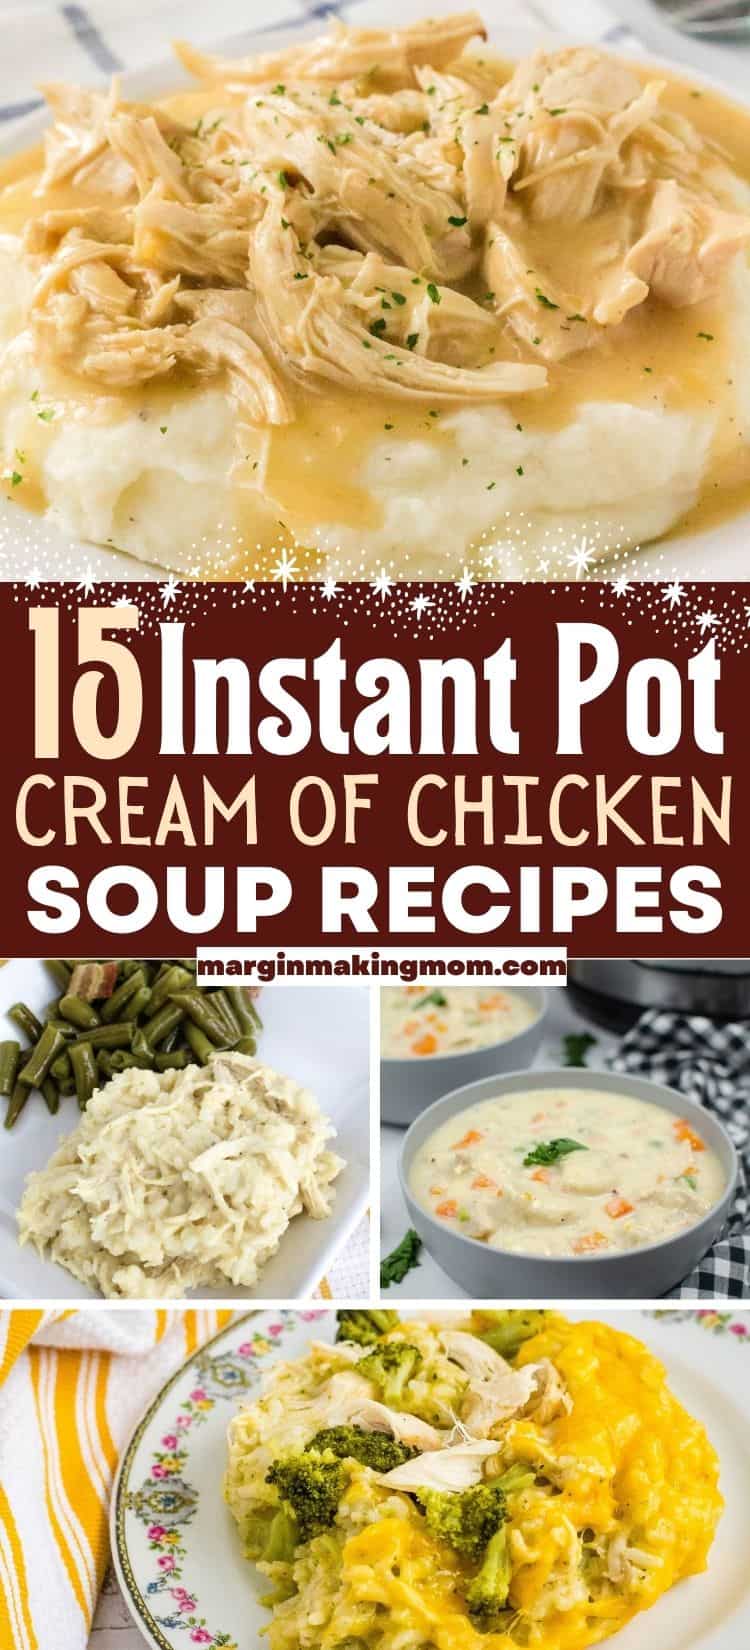 collage image featuring various Instant Pot recipes made with cream of chicken soup